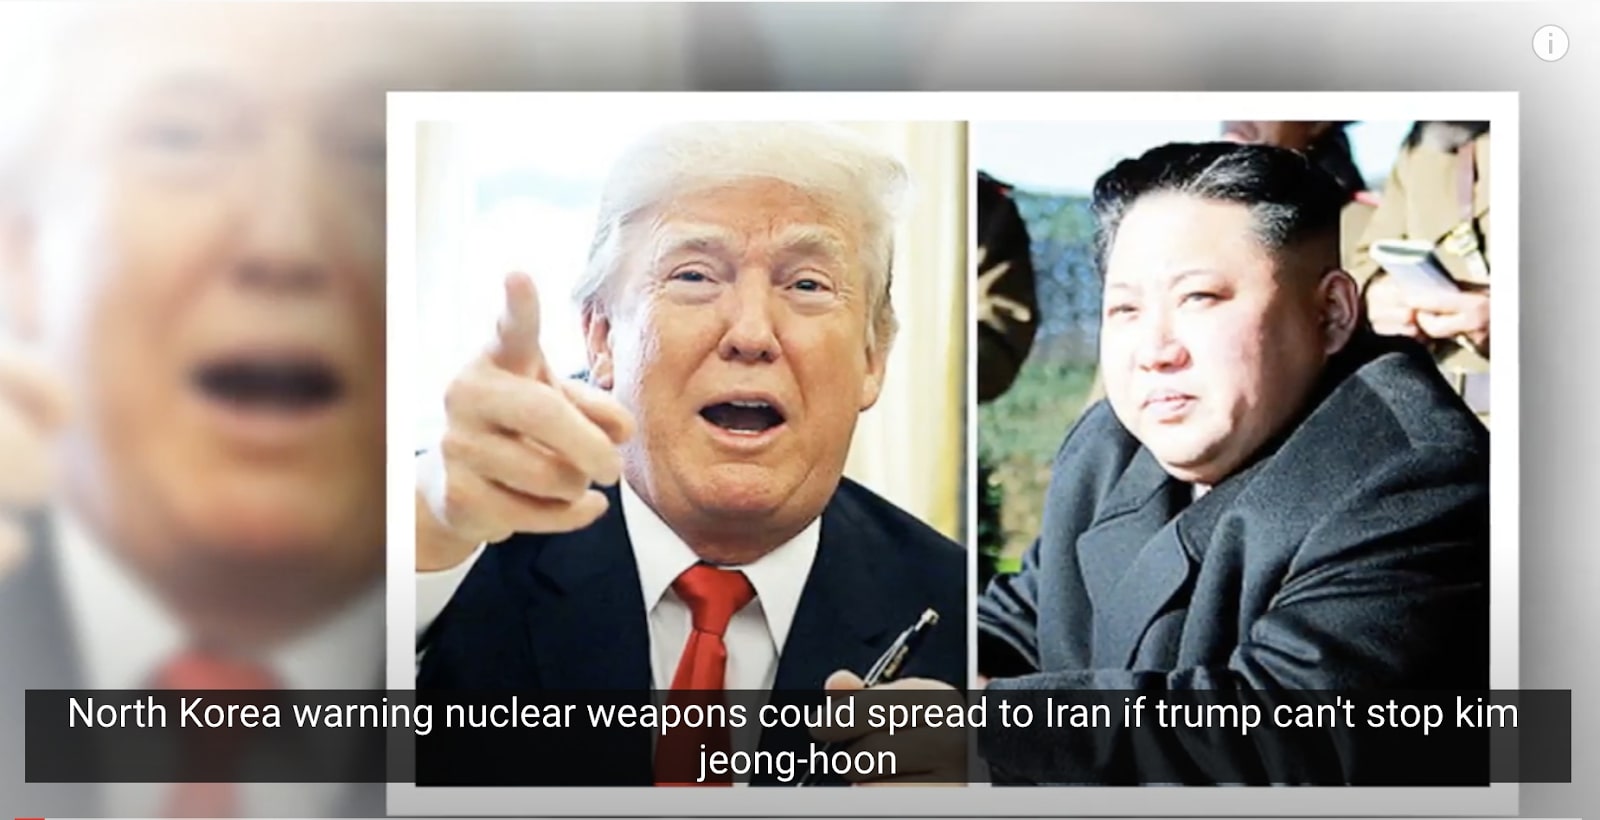 North Korea WARNING Nuclear weapons could spread to Iran if Trump can't stop Kim Jong Un Dr. Parker Interview with David Webb on Fox News.